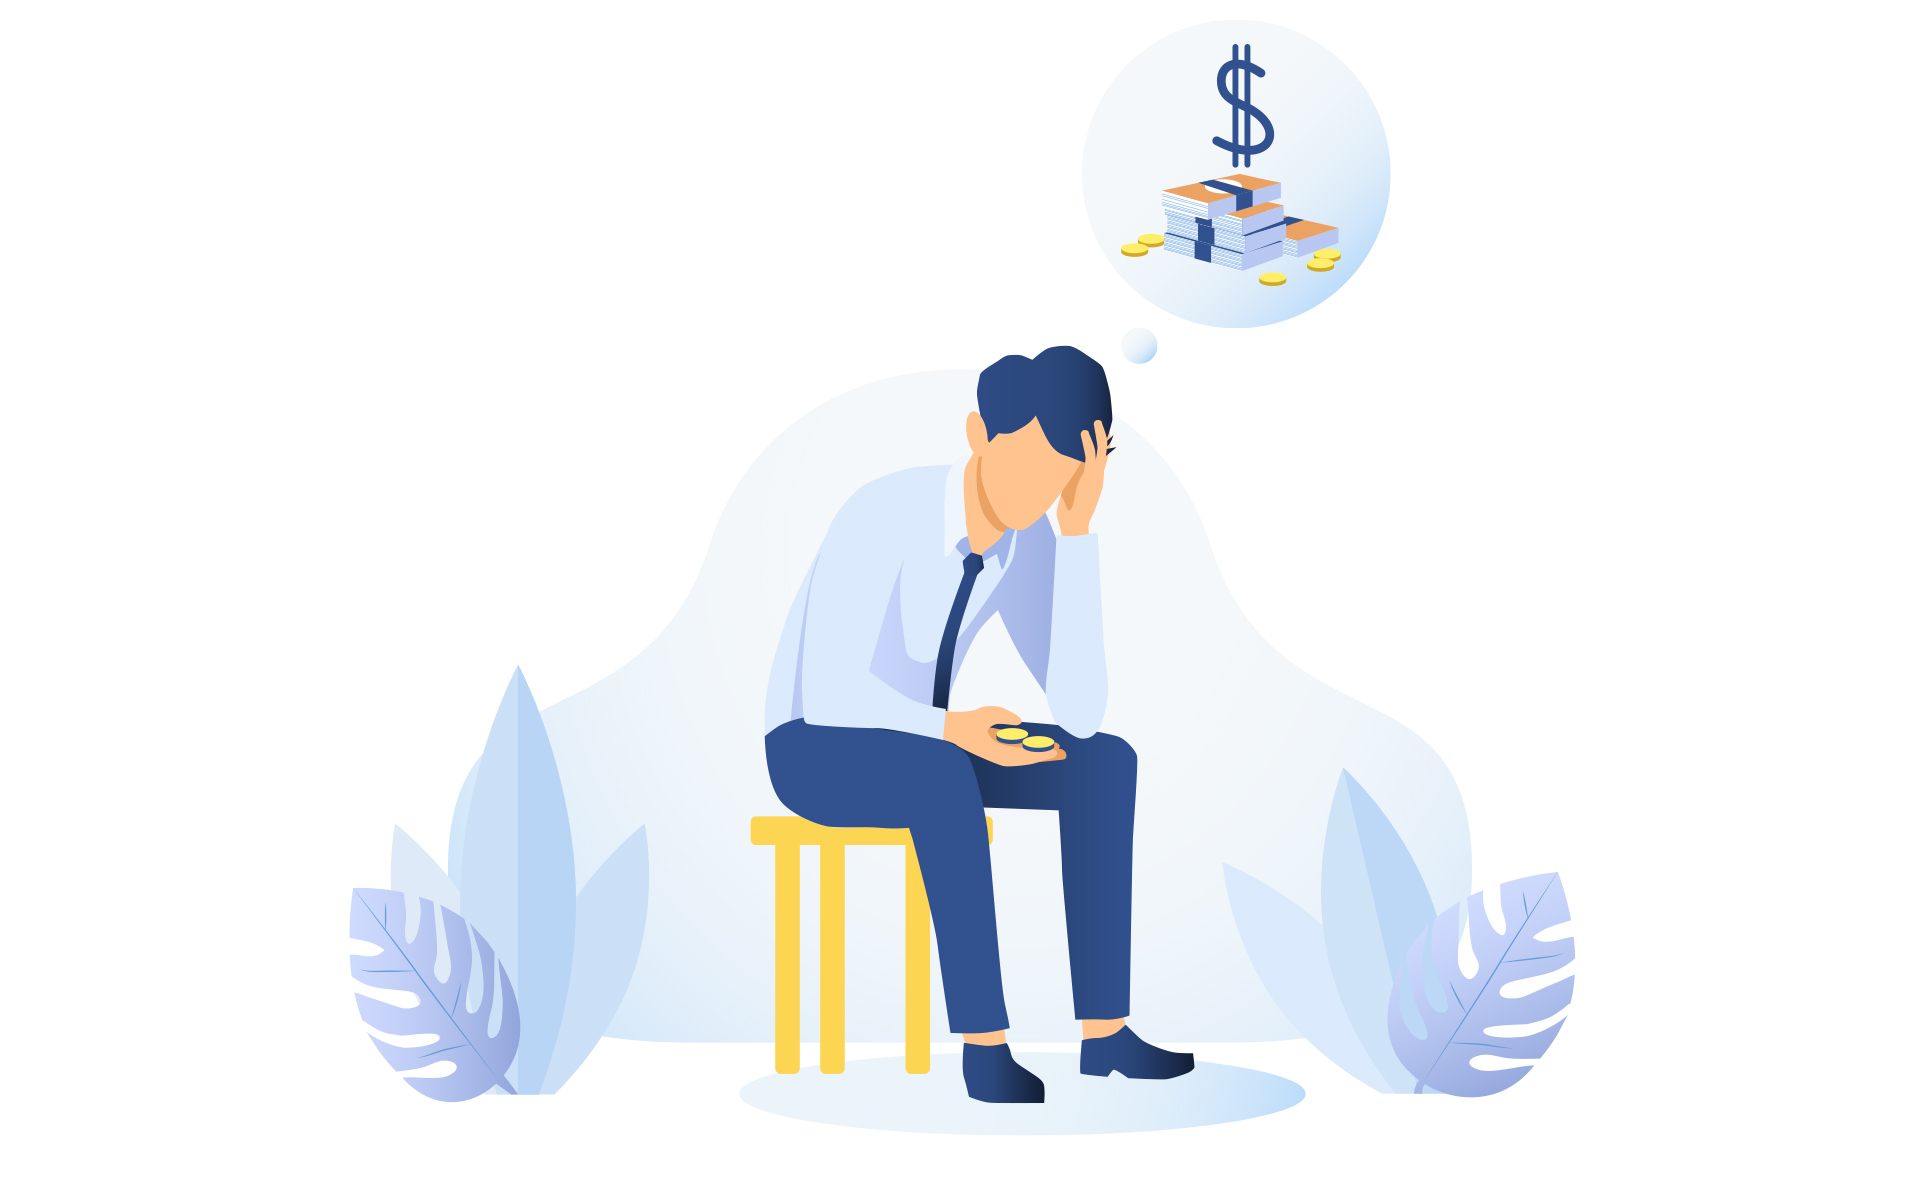 Guided meditation to ease financial stress - Illustration of a man worried about money